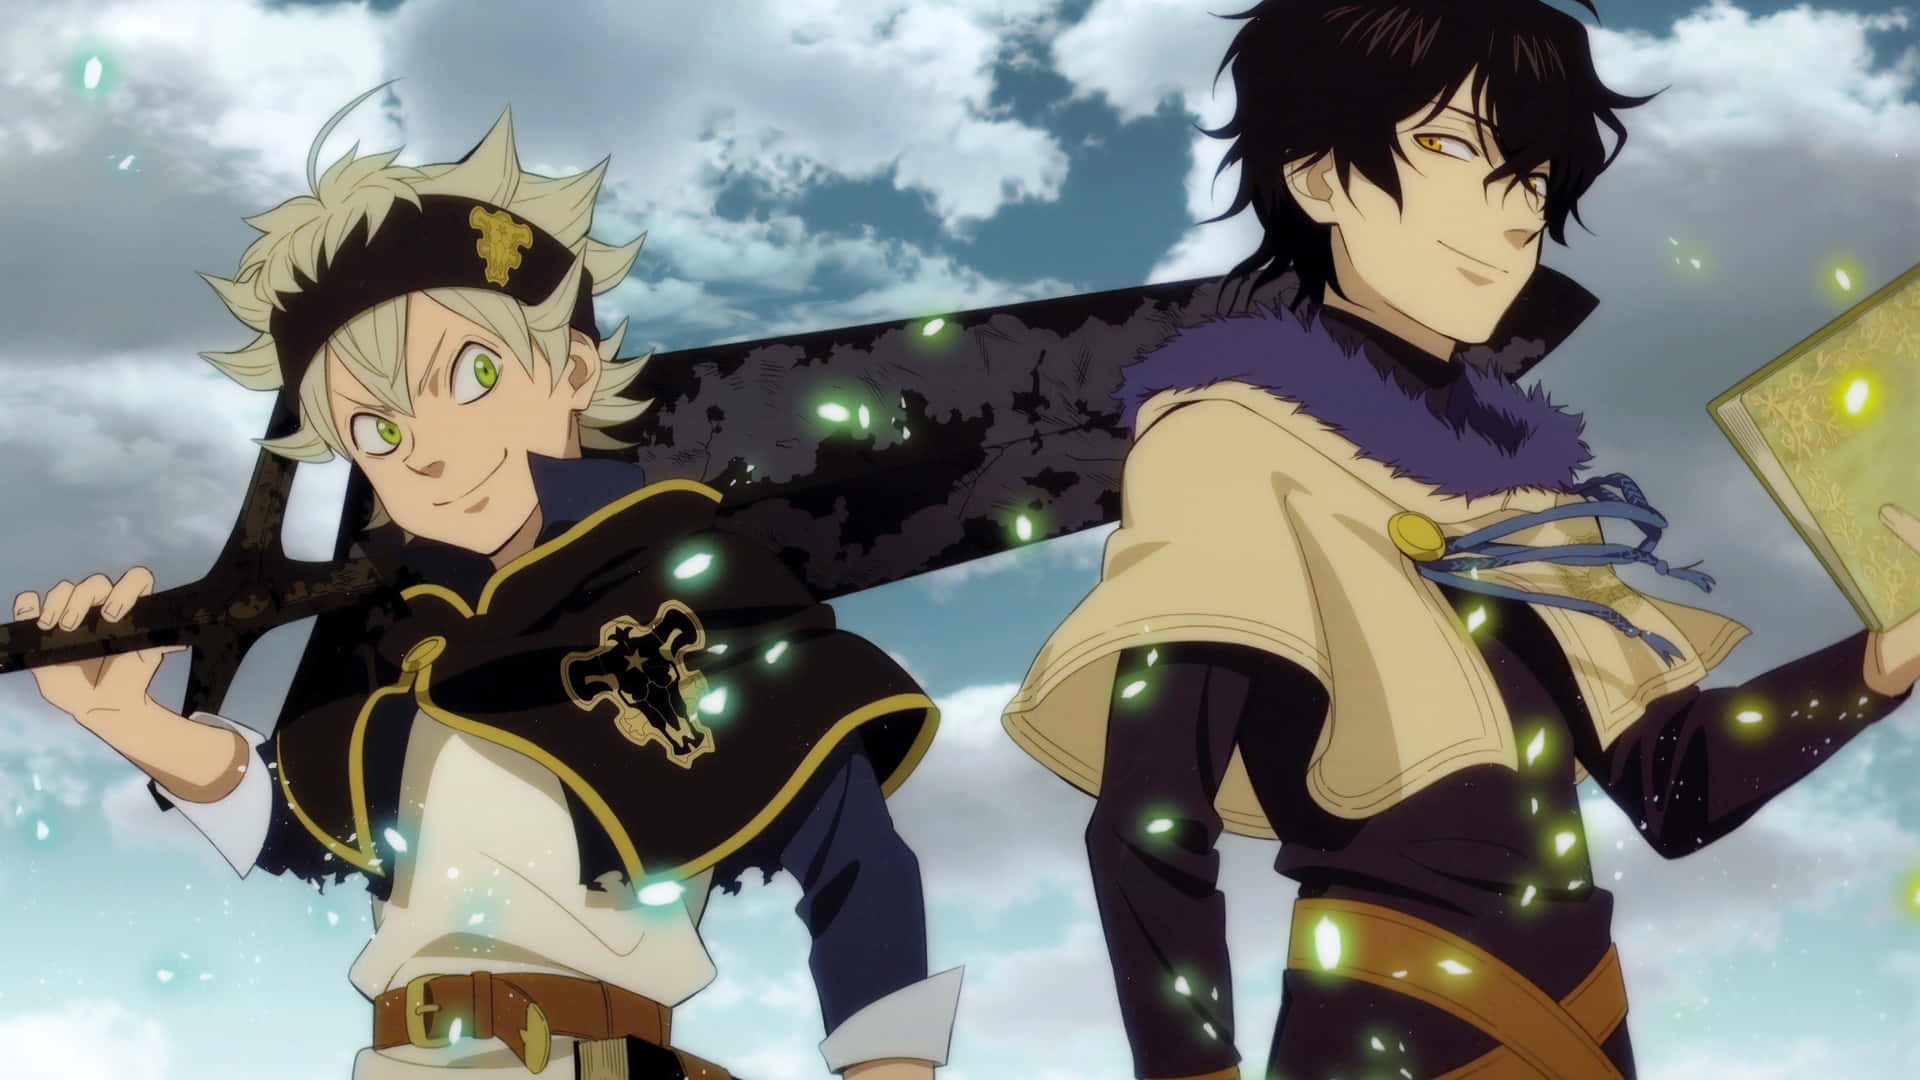 Asta, The Protagonist Of The Anime Black Clover Background